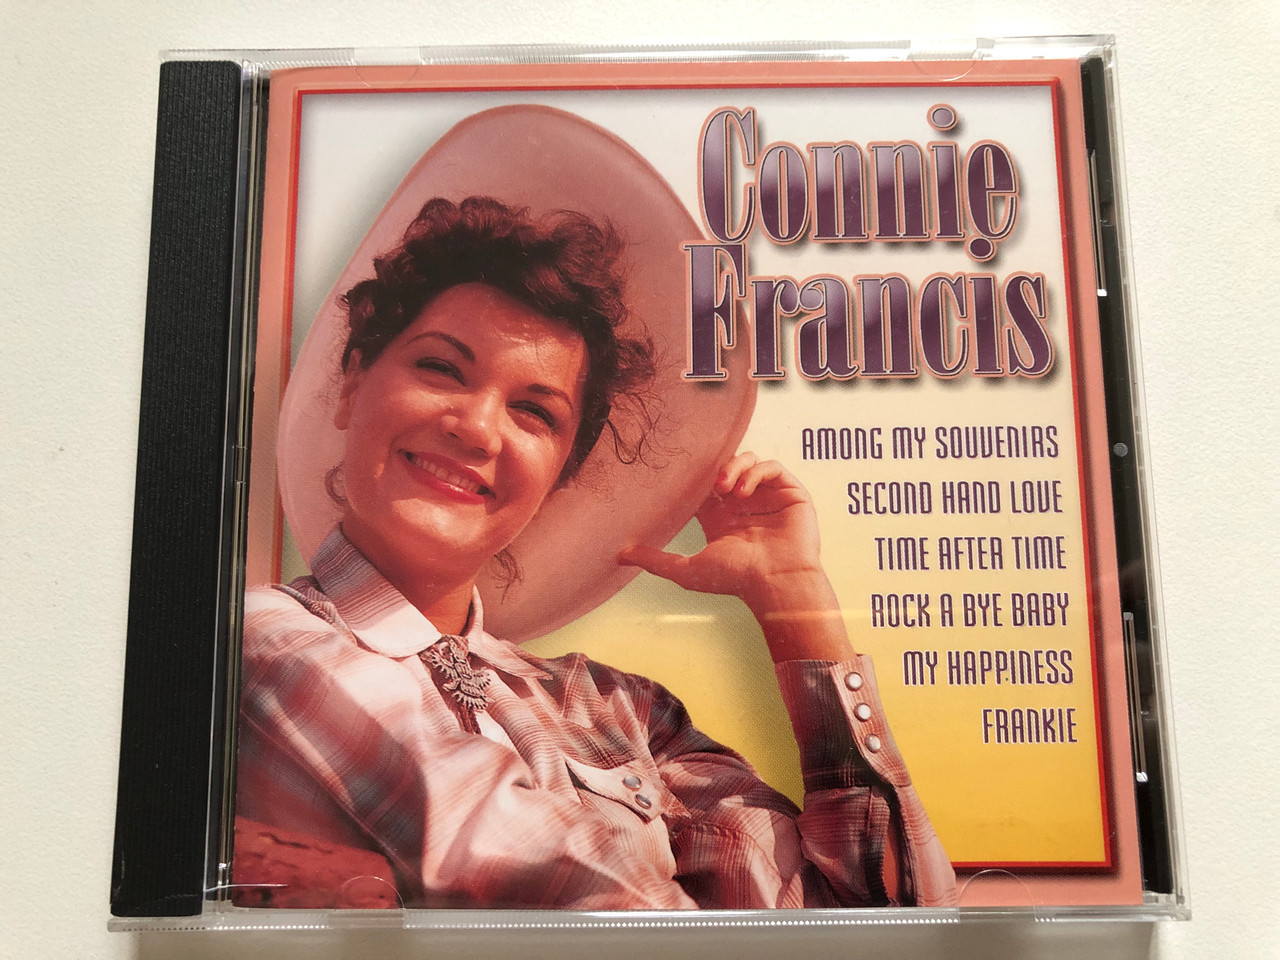 https://cdn10.bigcommerce.com/s-62bdpkt7pb/products/0/images/310535/Connie_Francis_-_Among_My_Souvenirs_Second_Hand_Love_Time_After_Time_Rock_A_Bye_Baby_My_Happiness_Frankie_Forever_Gold_Audio_CD_2003_FG270_1__31362.1699381755.1280.1280.JPG?c=2